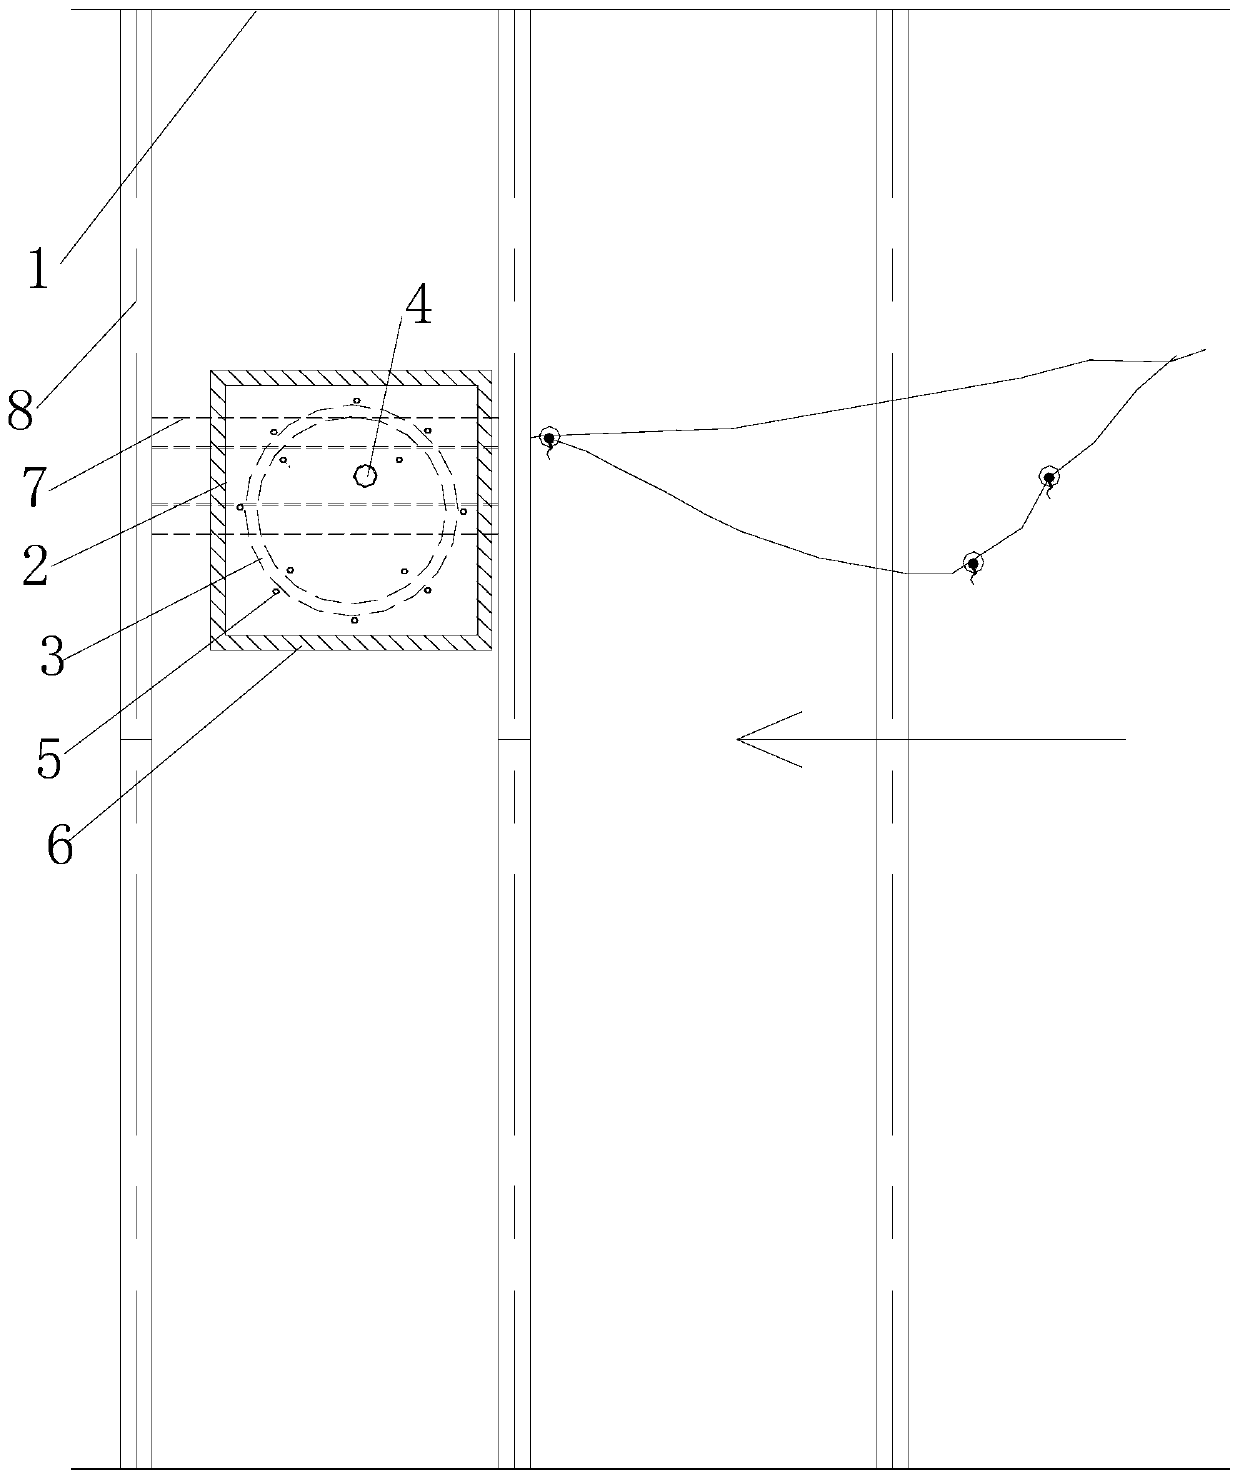 Open type TBM supporting shoe assisting jacking flow reduction tunnel water plugging method